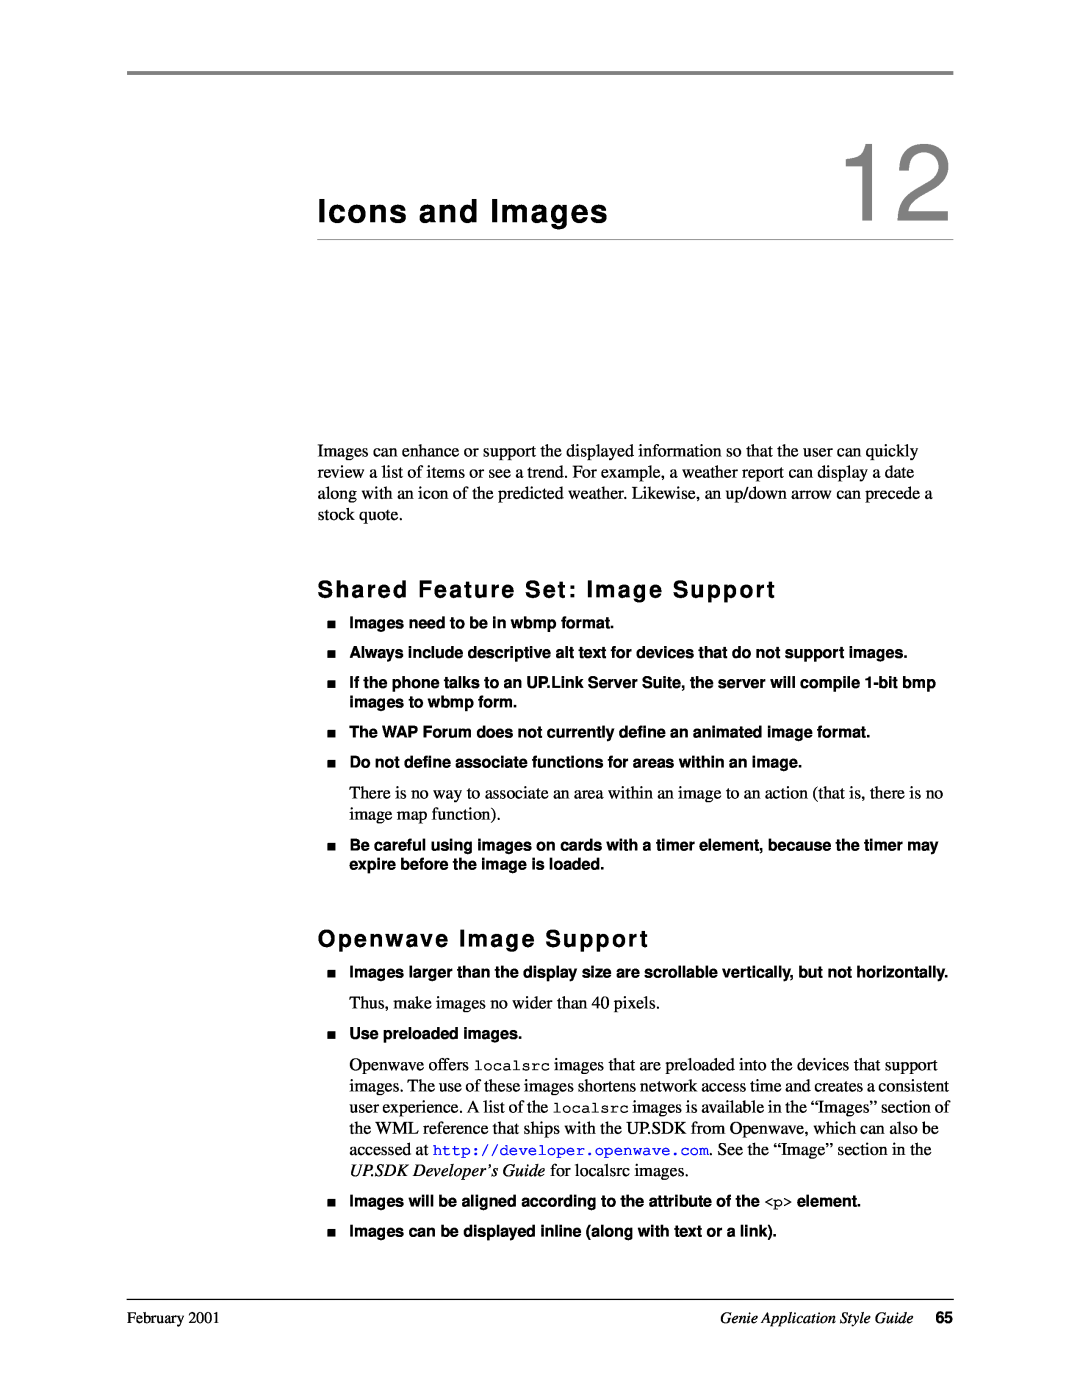 Genie 7110 manual Icons and Images, Shared Feature Set Imag e Suppor t, Openwave Imag e Suppor t 